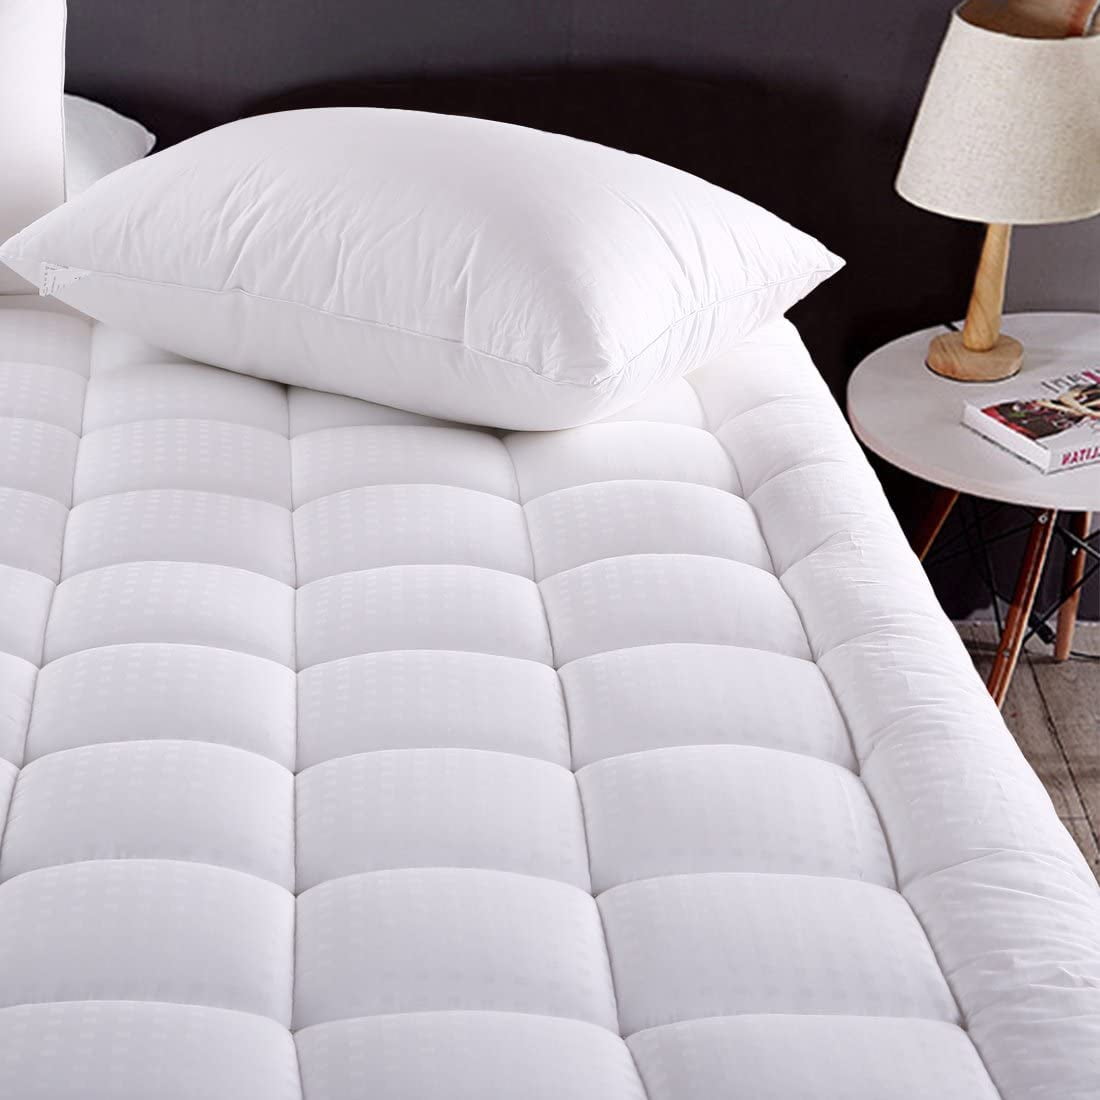 King Size Mattress Pad Topper Pillow Top Cover Bed Soft Hypoallergenic Cooling 